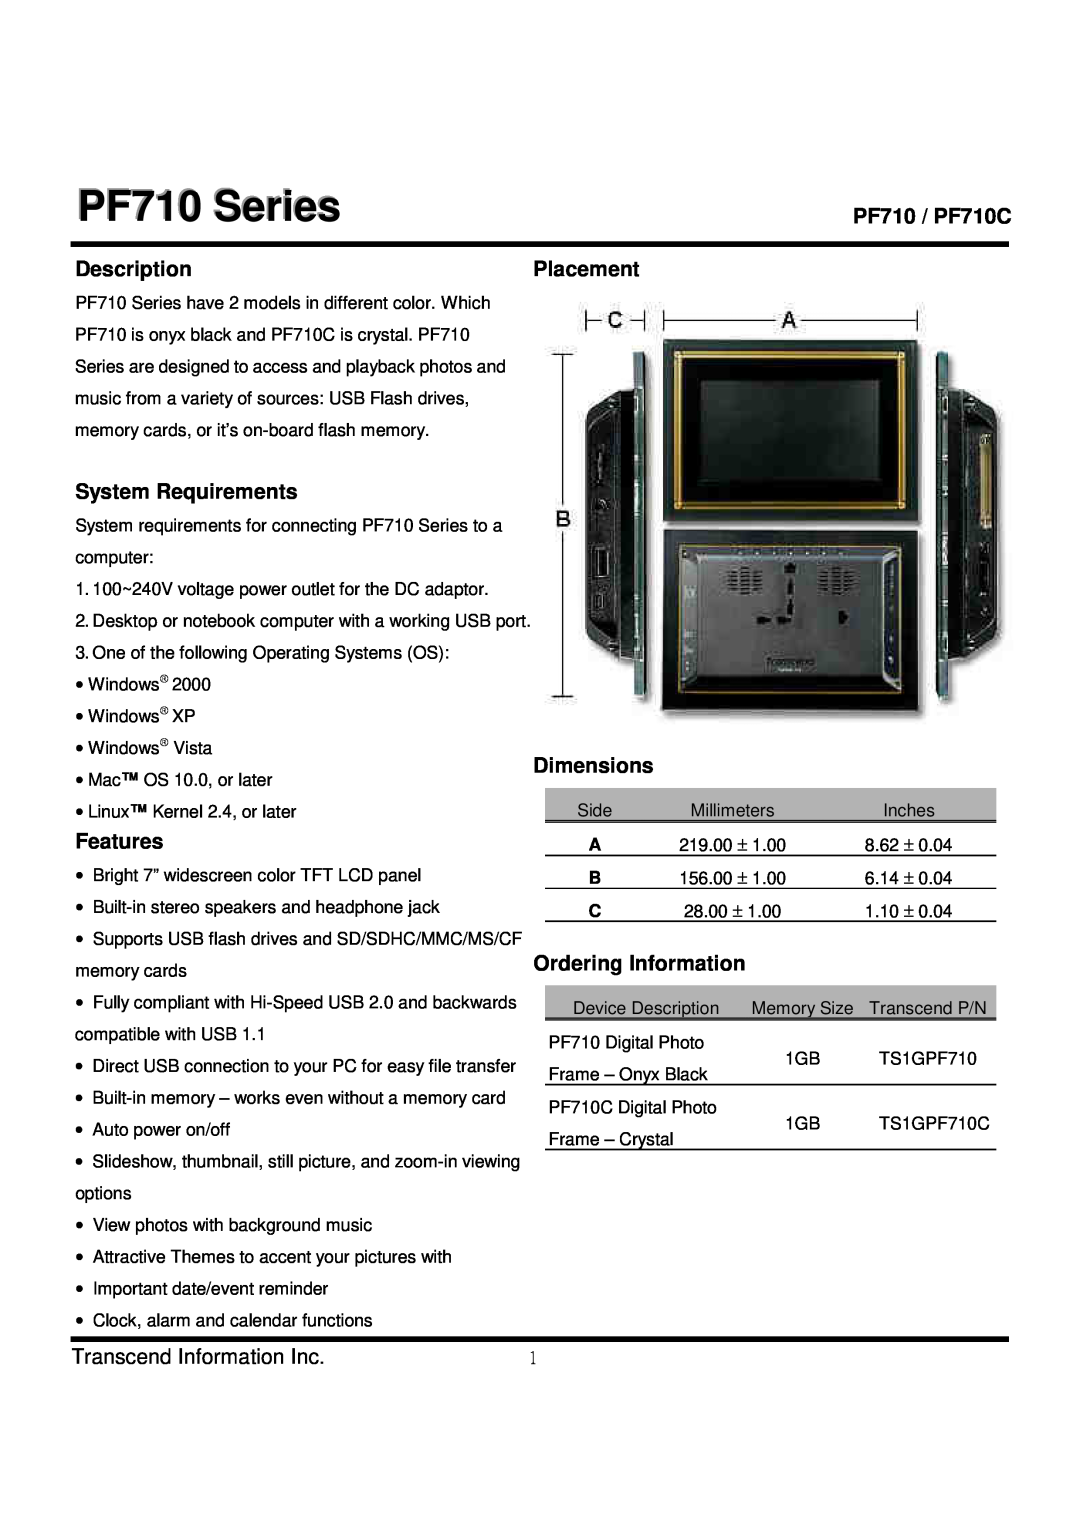 Transcend Information TS1GPF710 dimensions PF710 Series, Description, Placement, System Requirements, Features, Dimensions 